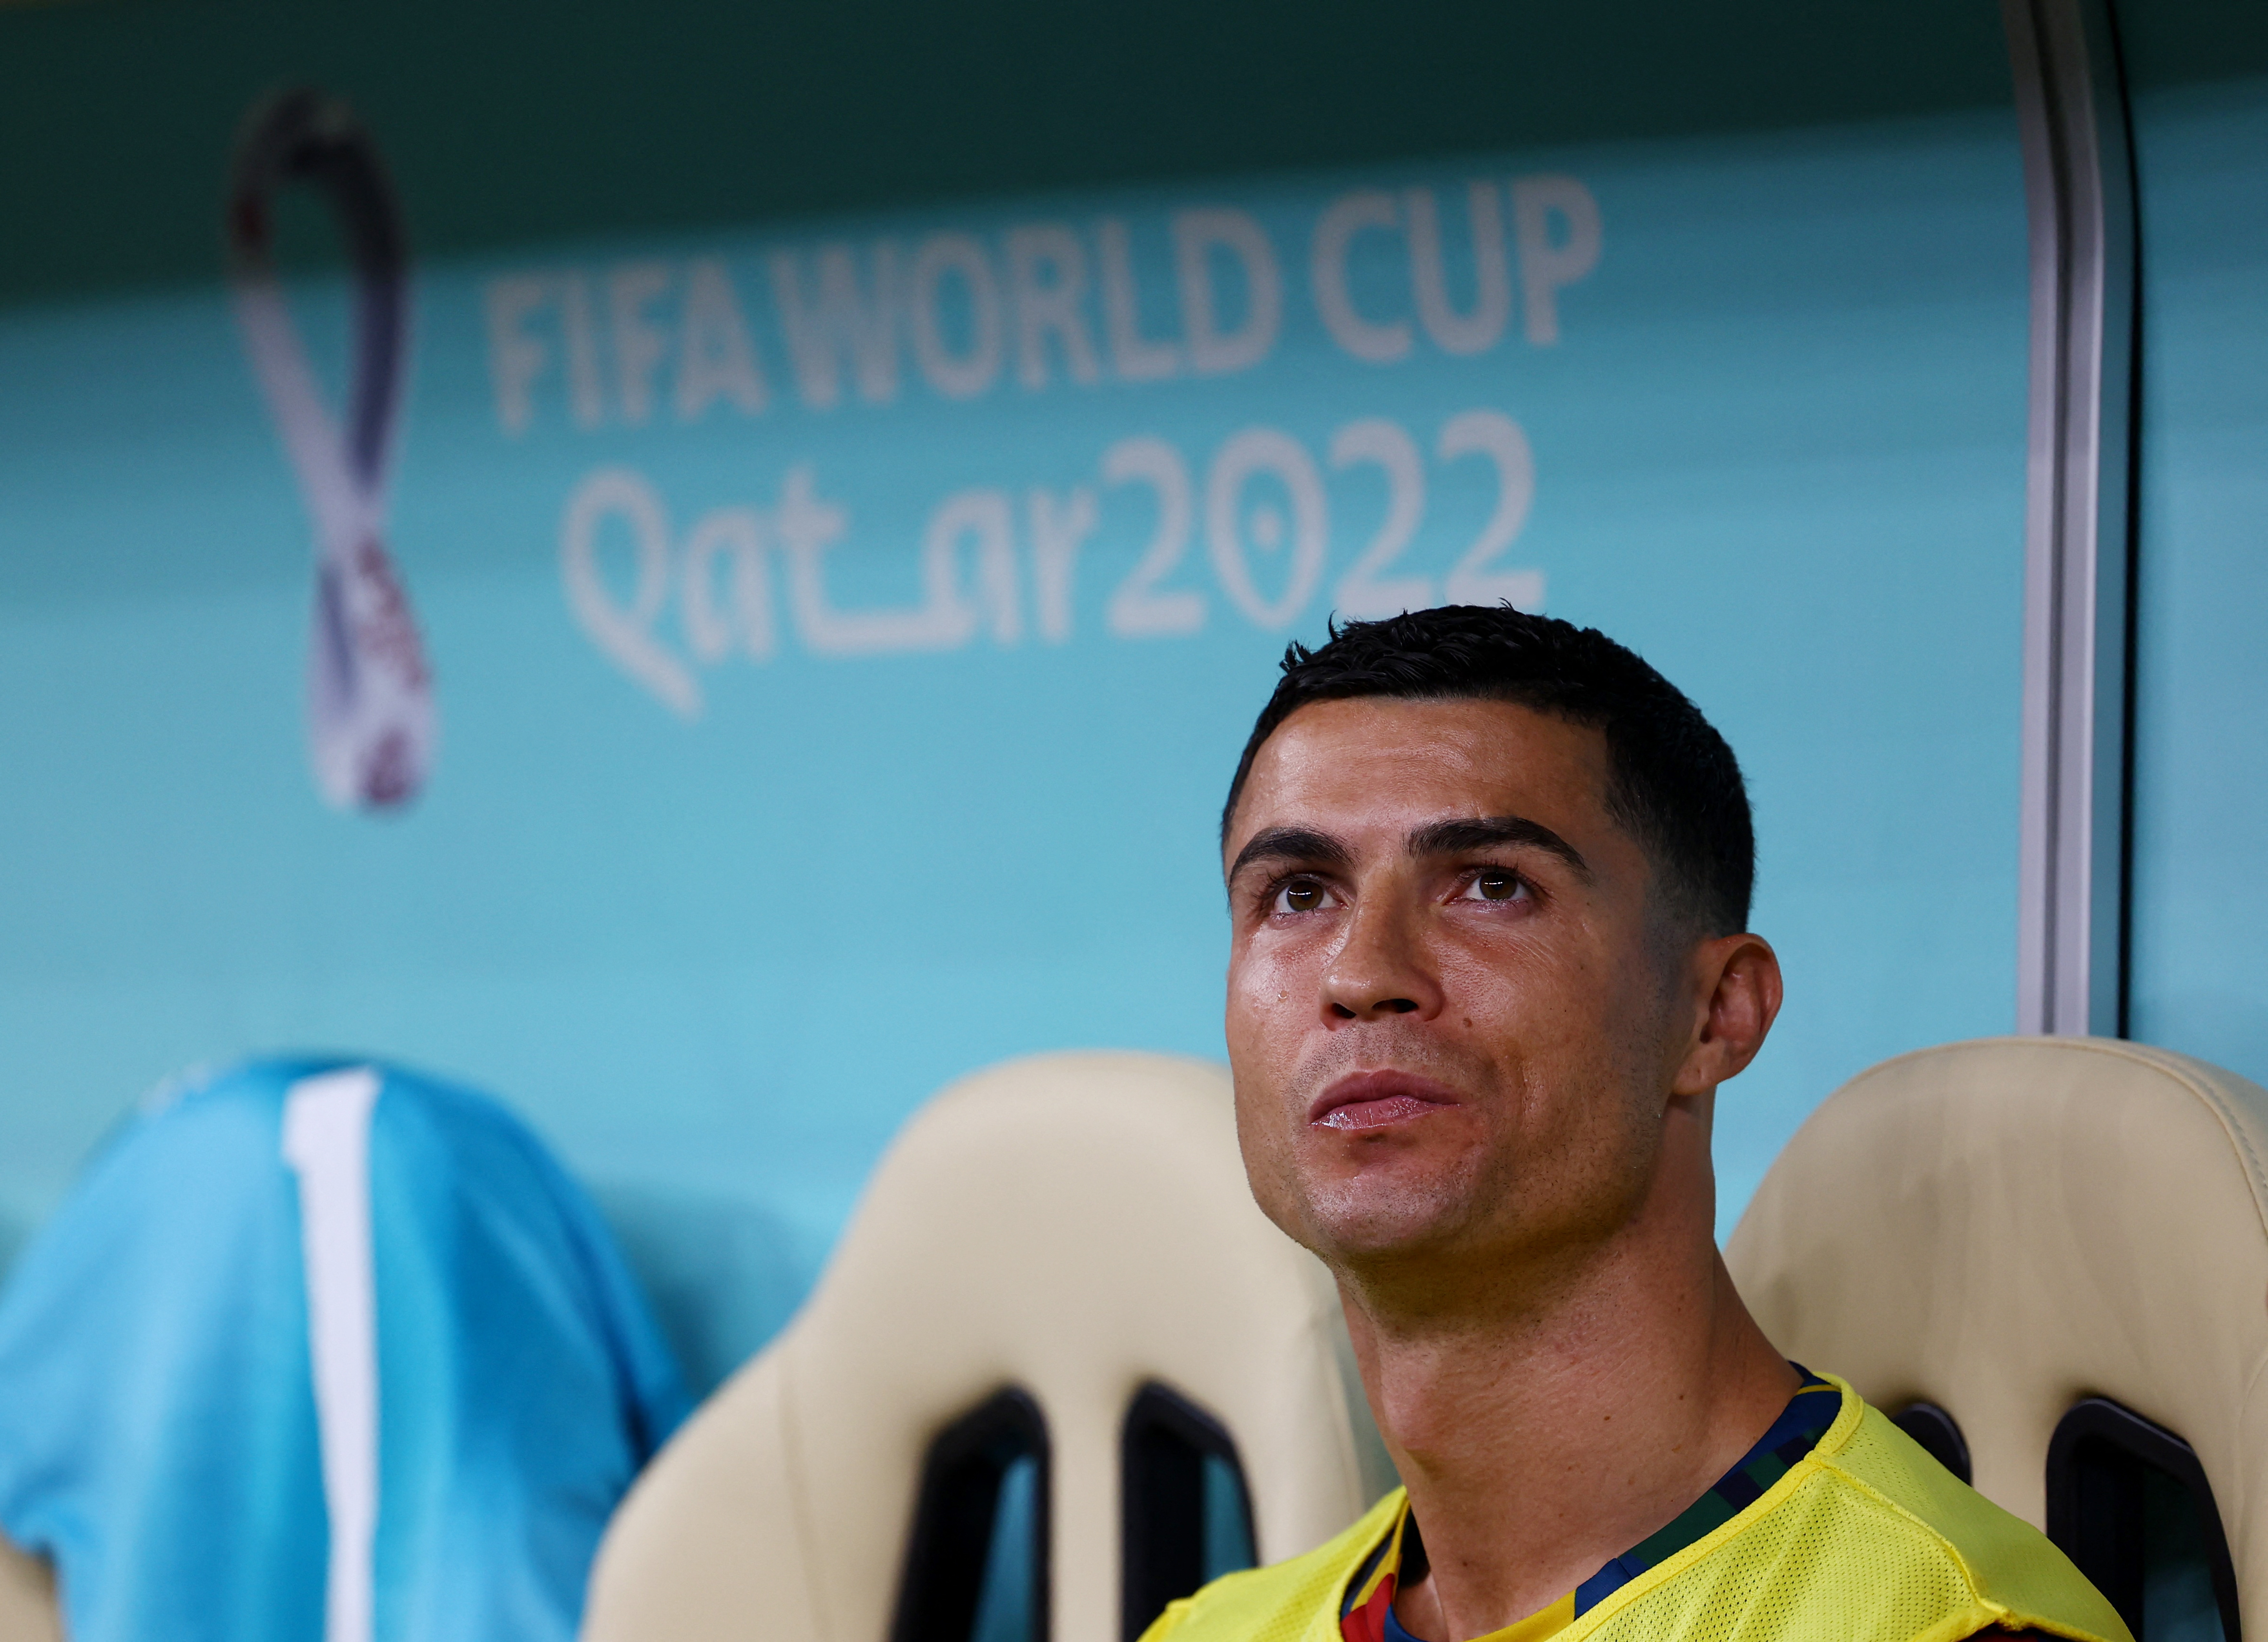 Soccer Football - FIFA World Cup Qatar 2022 - Round of 16 - Portugal v Switzerland - Lusail Stadium, Lusail, Qatar - December 6, 2022 Portugal's Cristiano Ronaldo on the substitutes bench before the match REUTERS/Kai Pfaffenbach